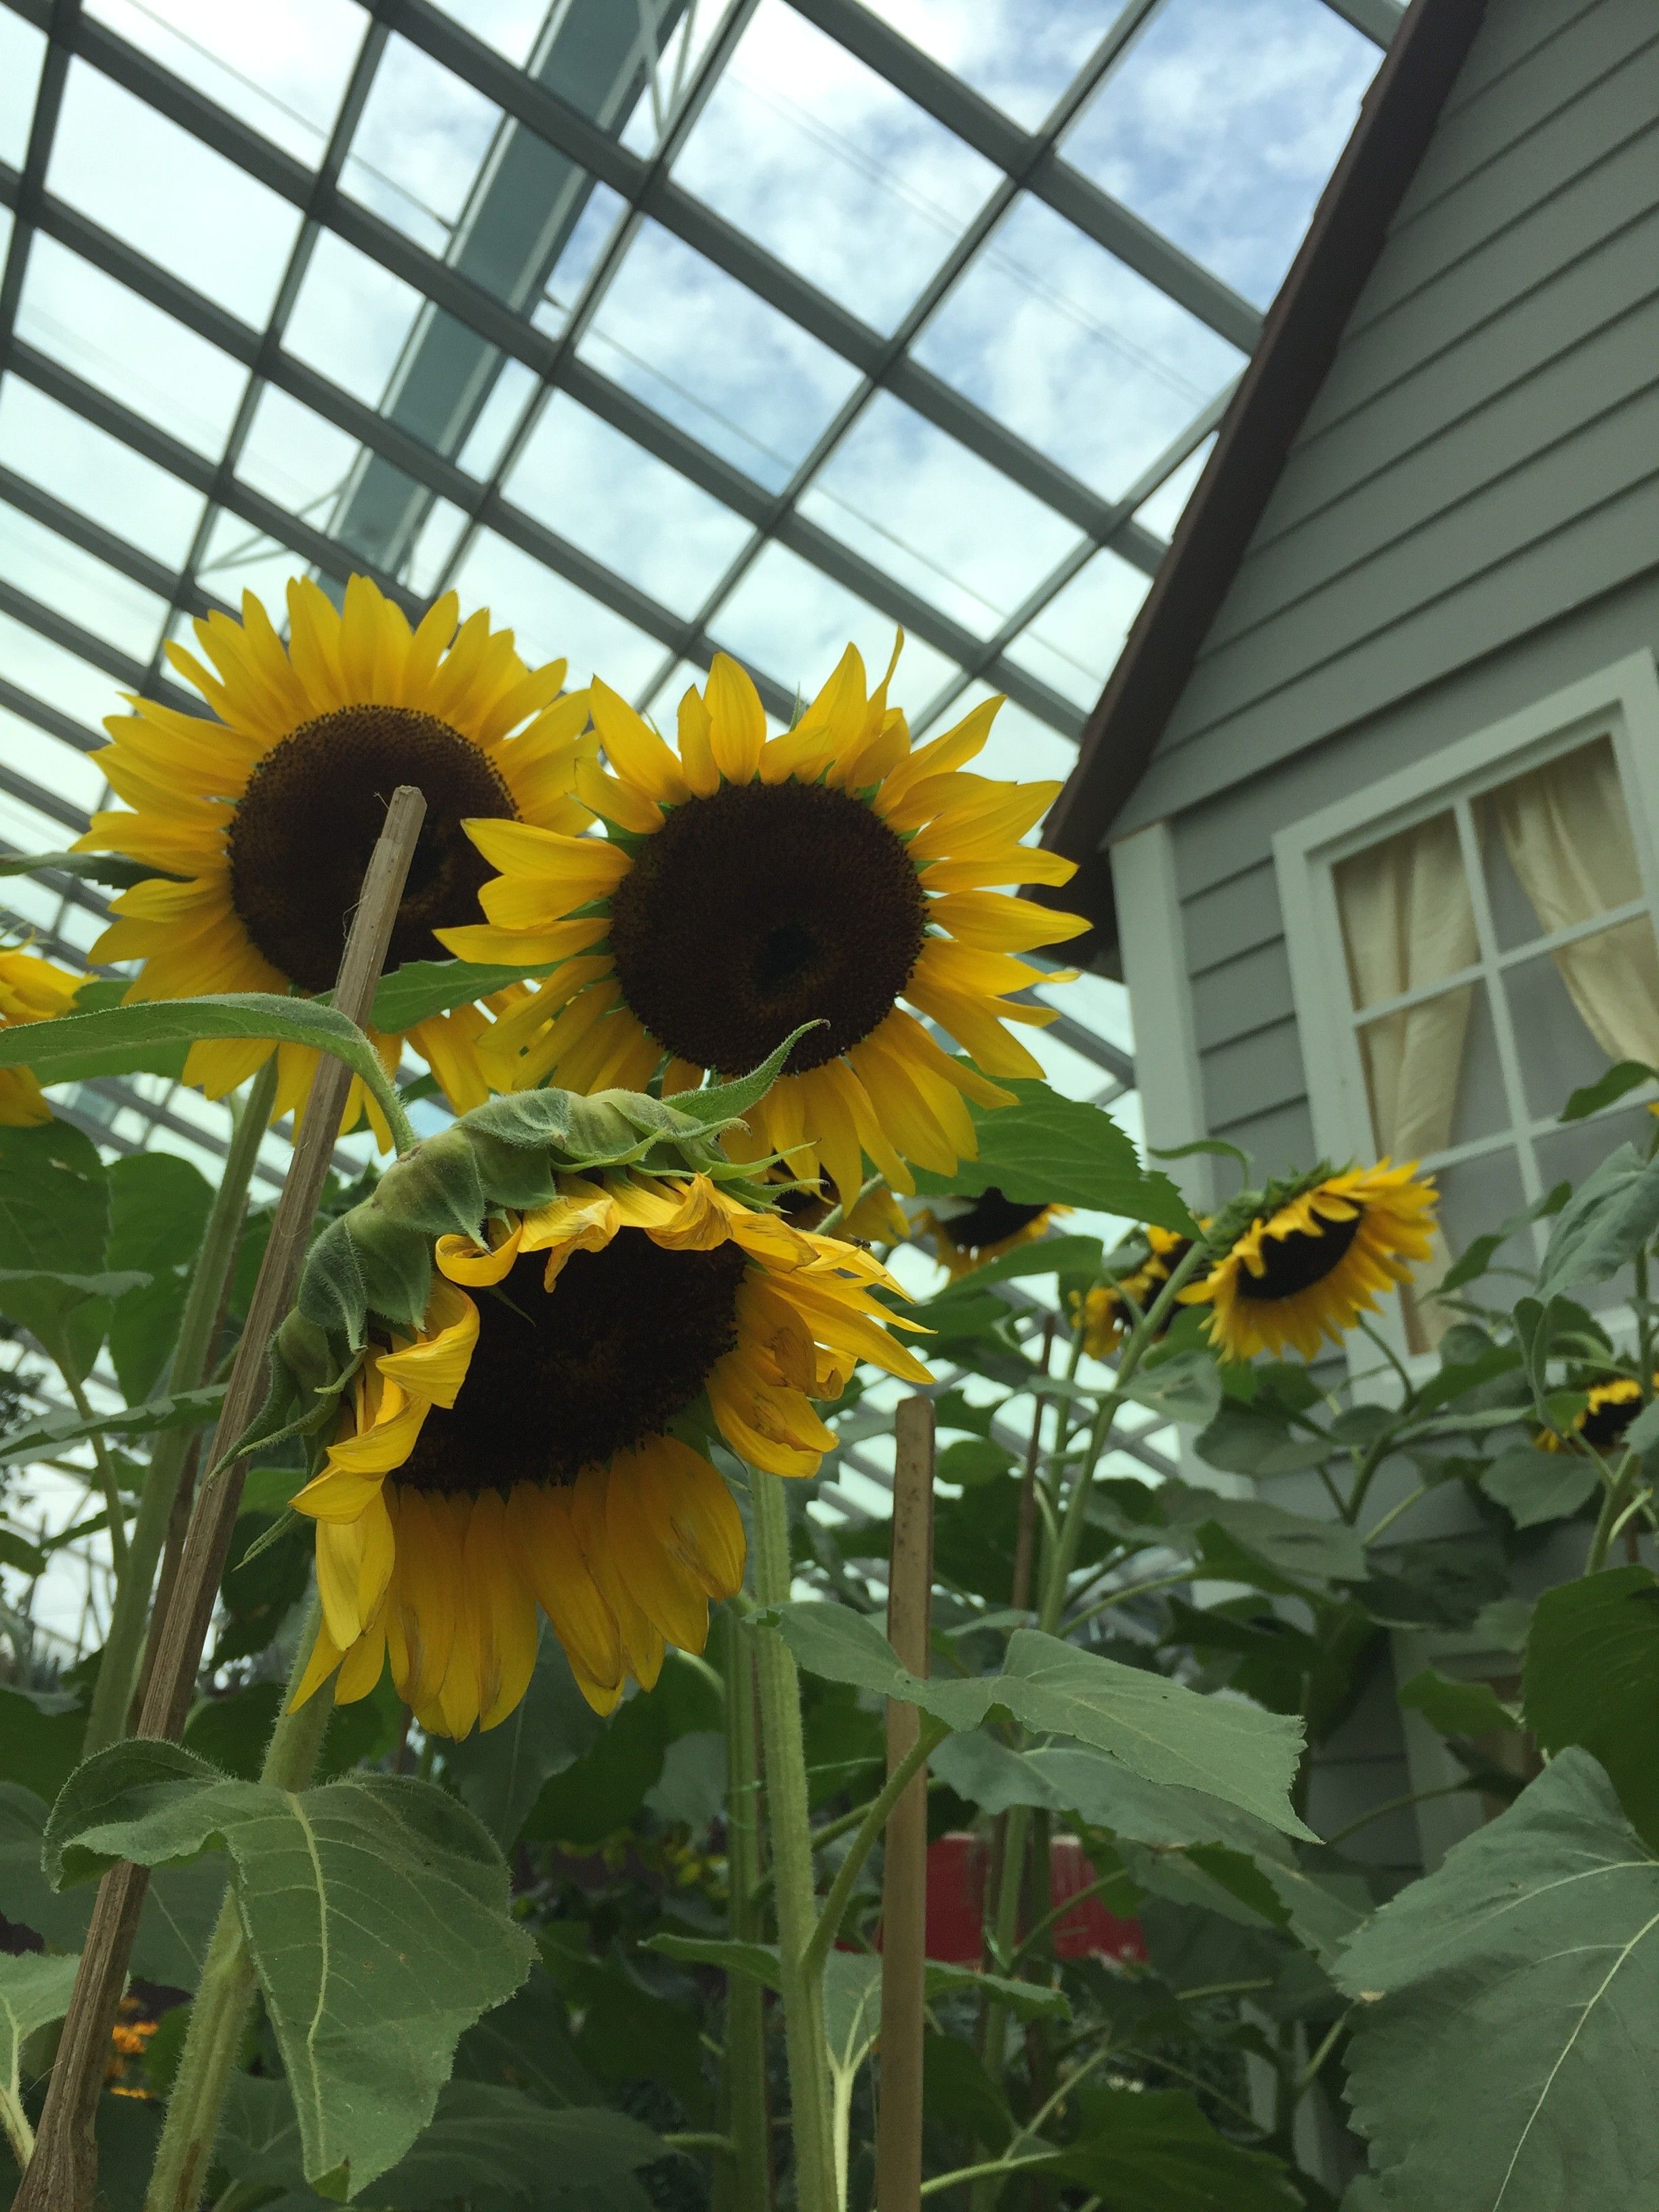 Caption: A Photo of  Some Sunflowers Inside the Flowers Dome (Local Guides @AngieYC)